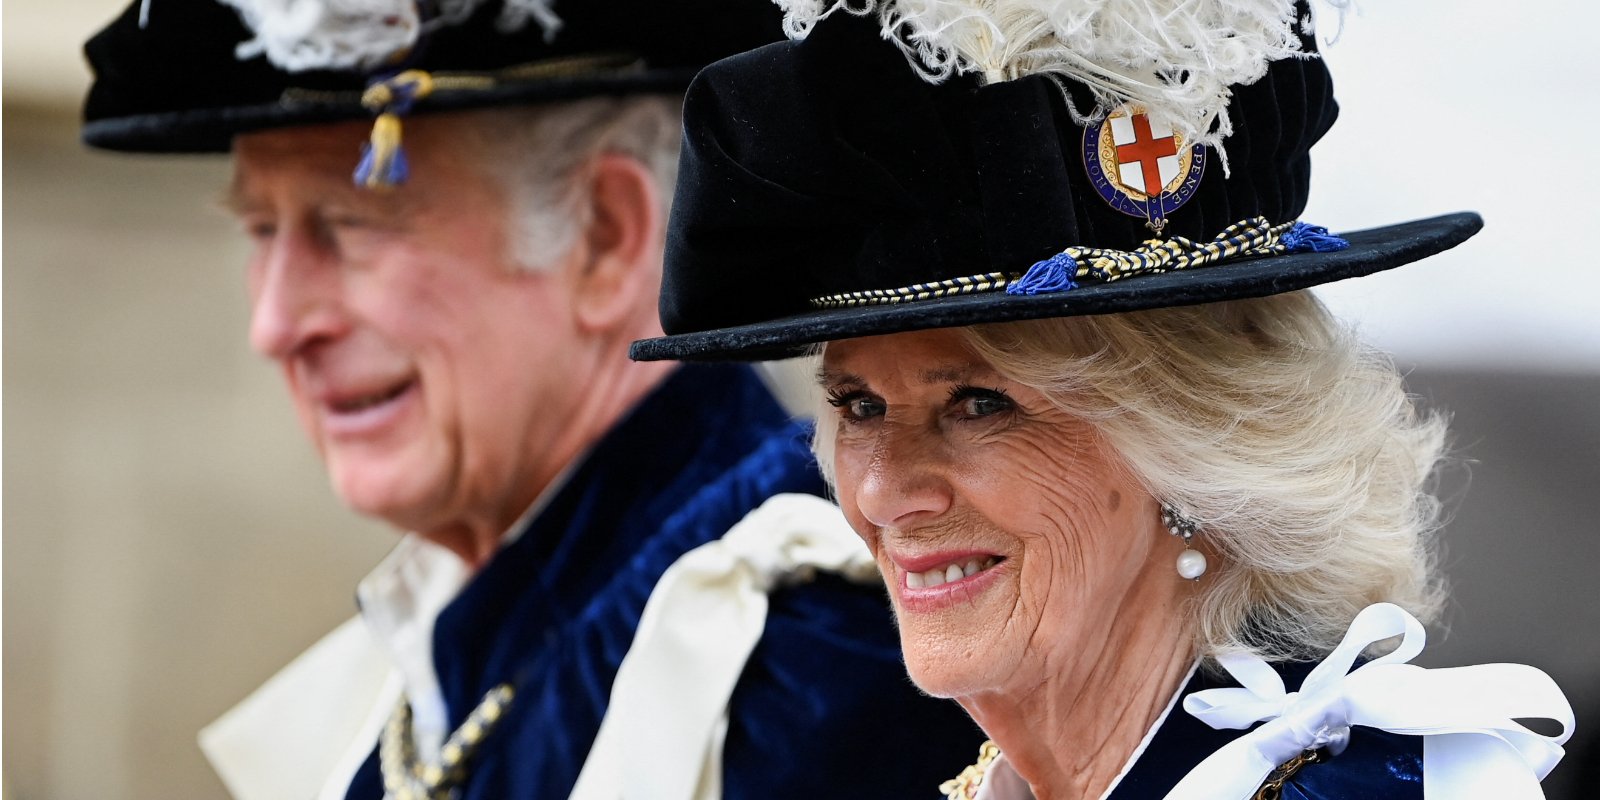 King Charles III and Camilla, Duchess of Cornwall, attend the Order of the Garter Service at St George's Chapel on June 13, 2022, in Windsor, England.